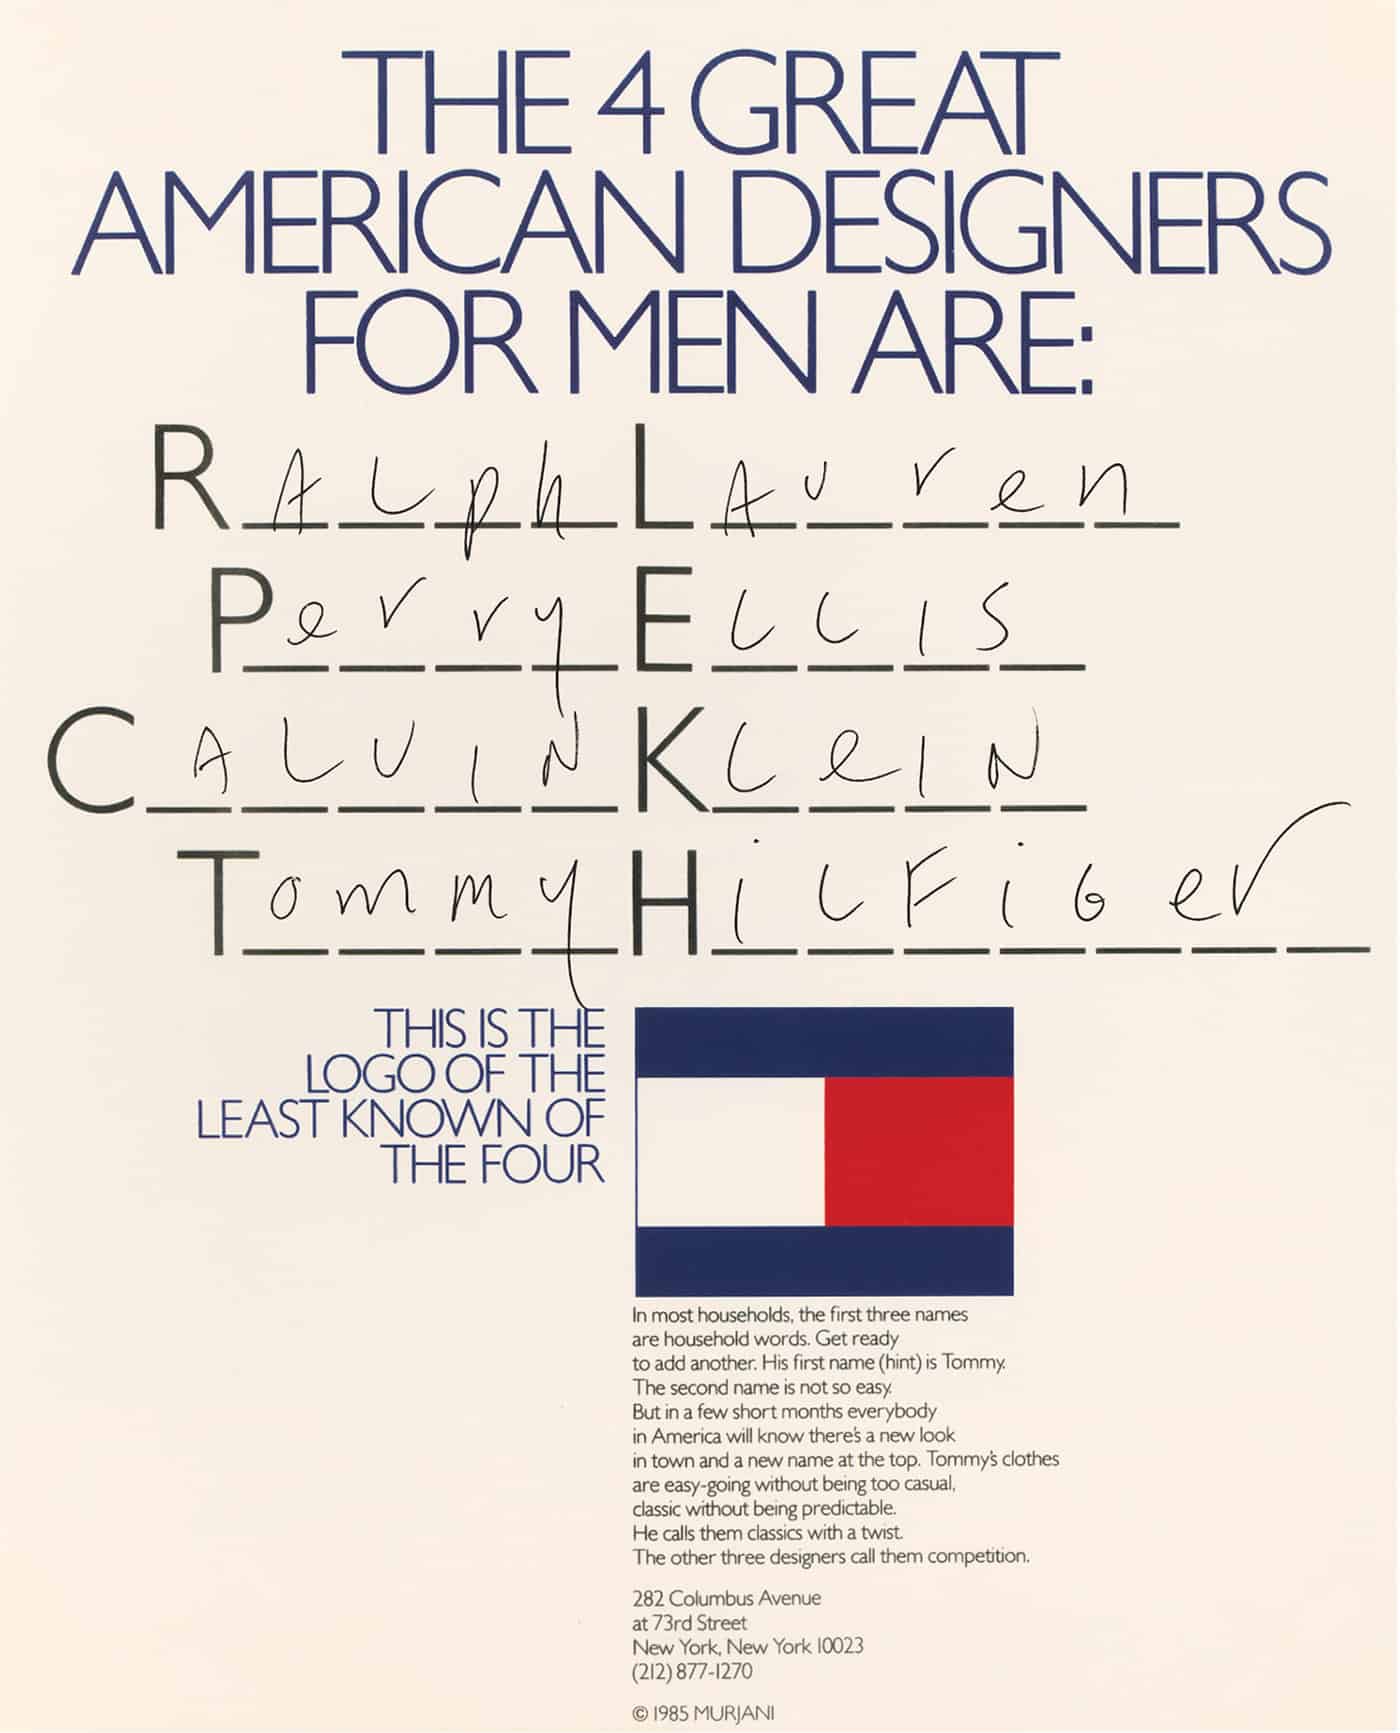 tommy hilfiger is a famous american brand